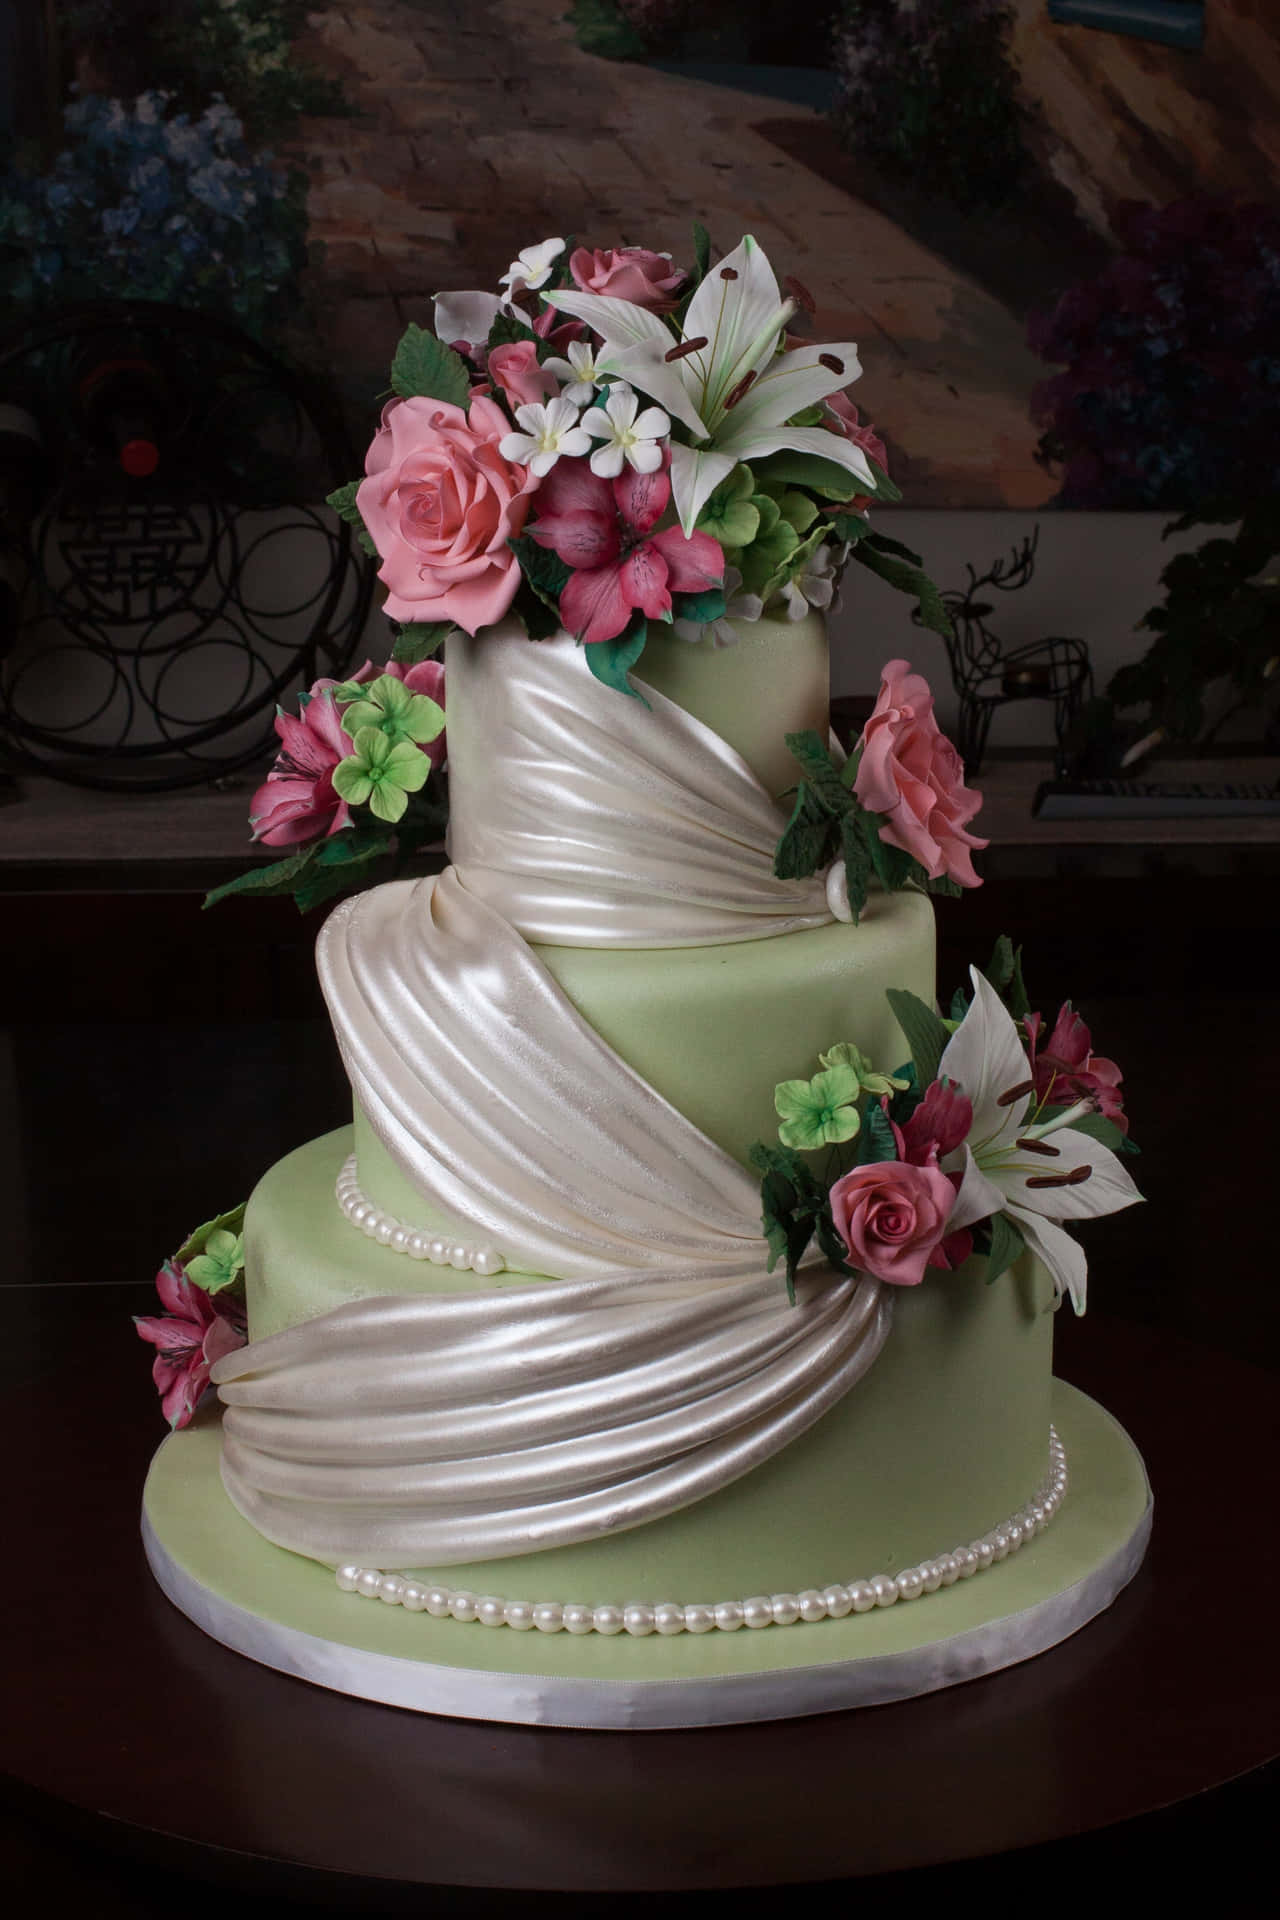 A Green Cake With Flowers